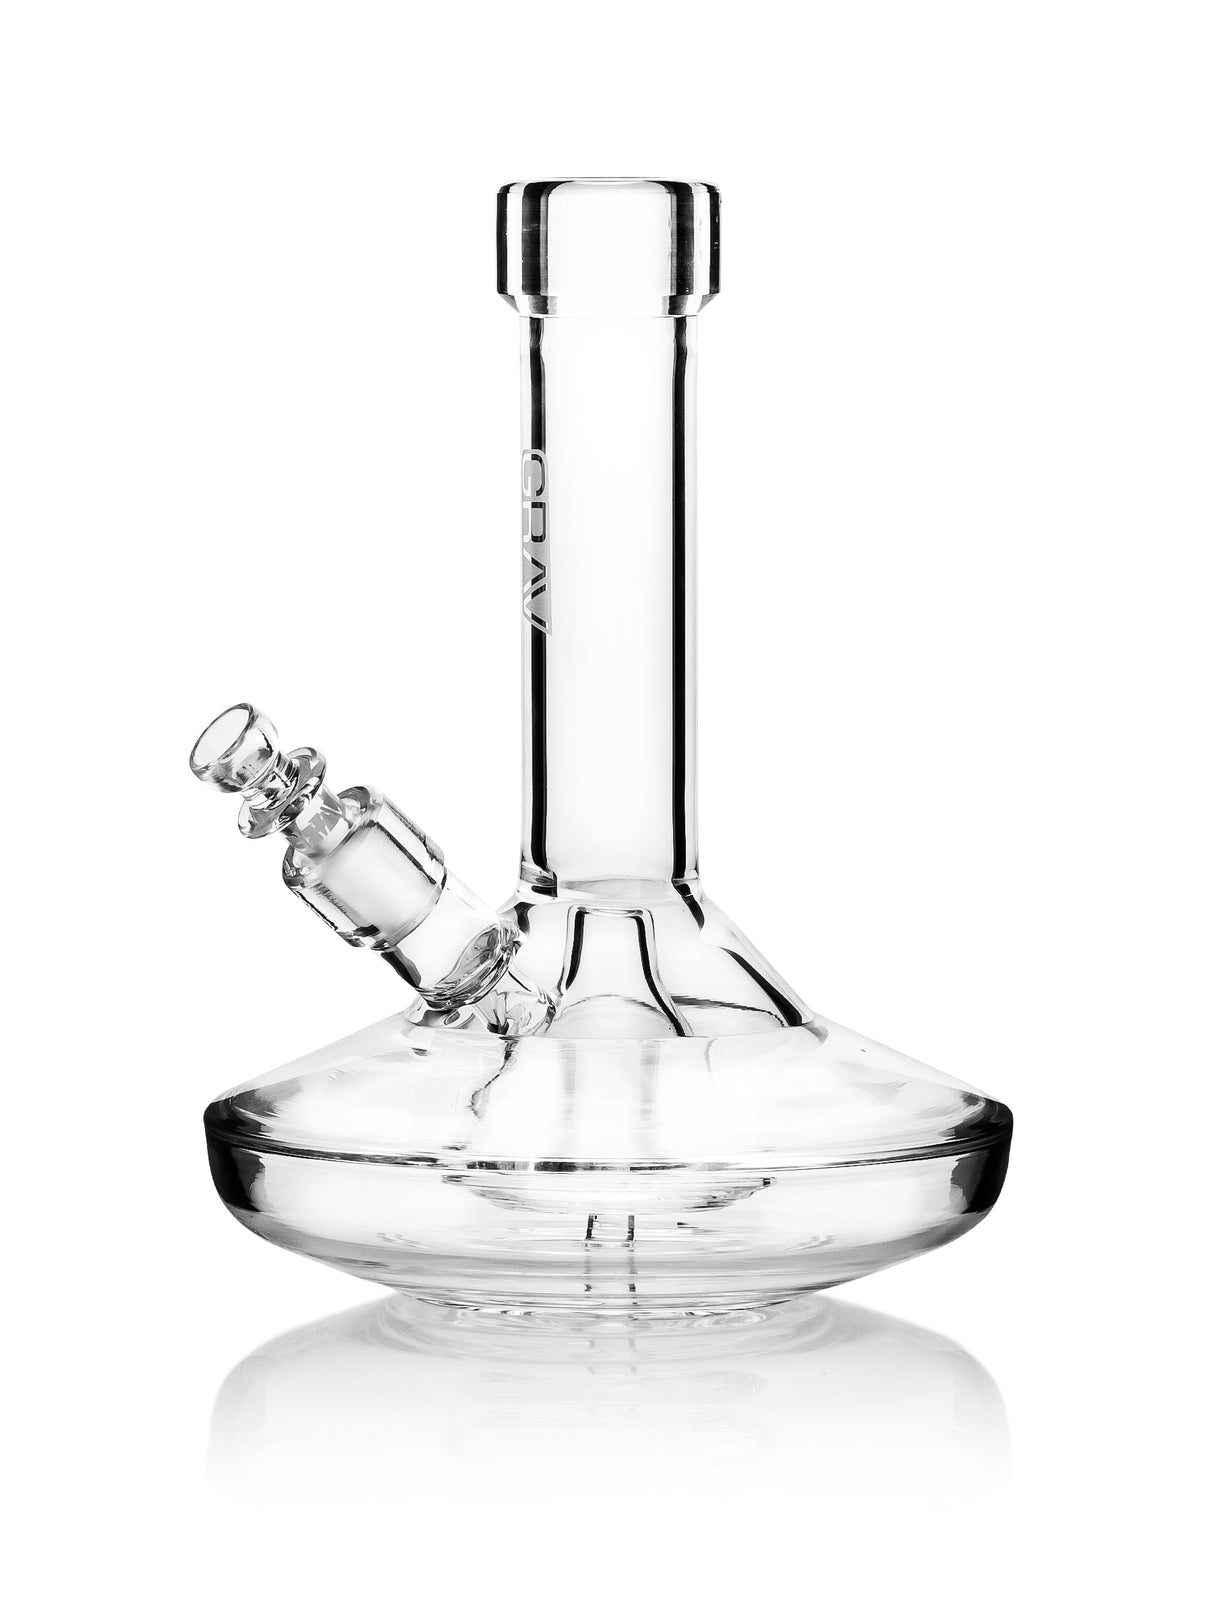 5” CLEAR Mini Bubbler Bong Hookah, Small Water pipe Clear REAL